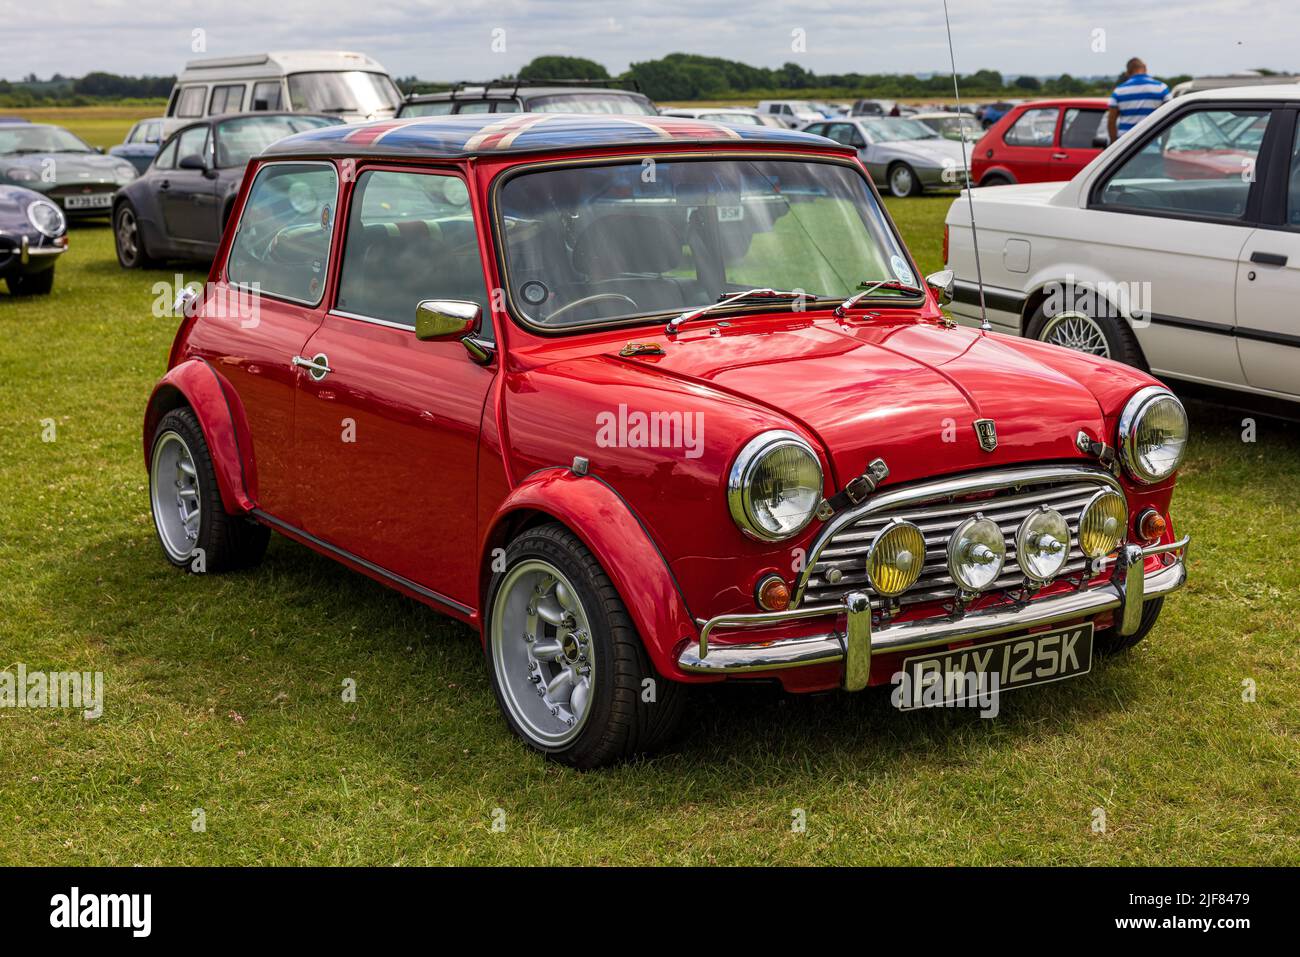 1972 Mini 1000 ‘PWY 125K’ on display at the Bicester Scramble on the ...